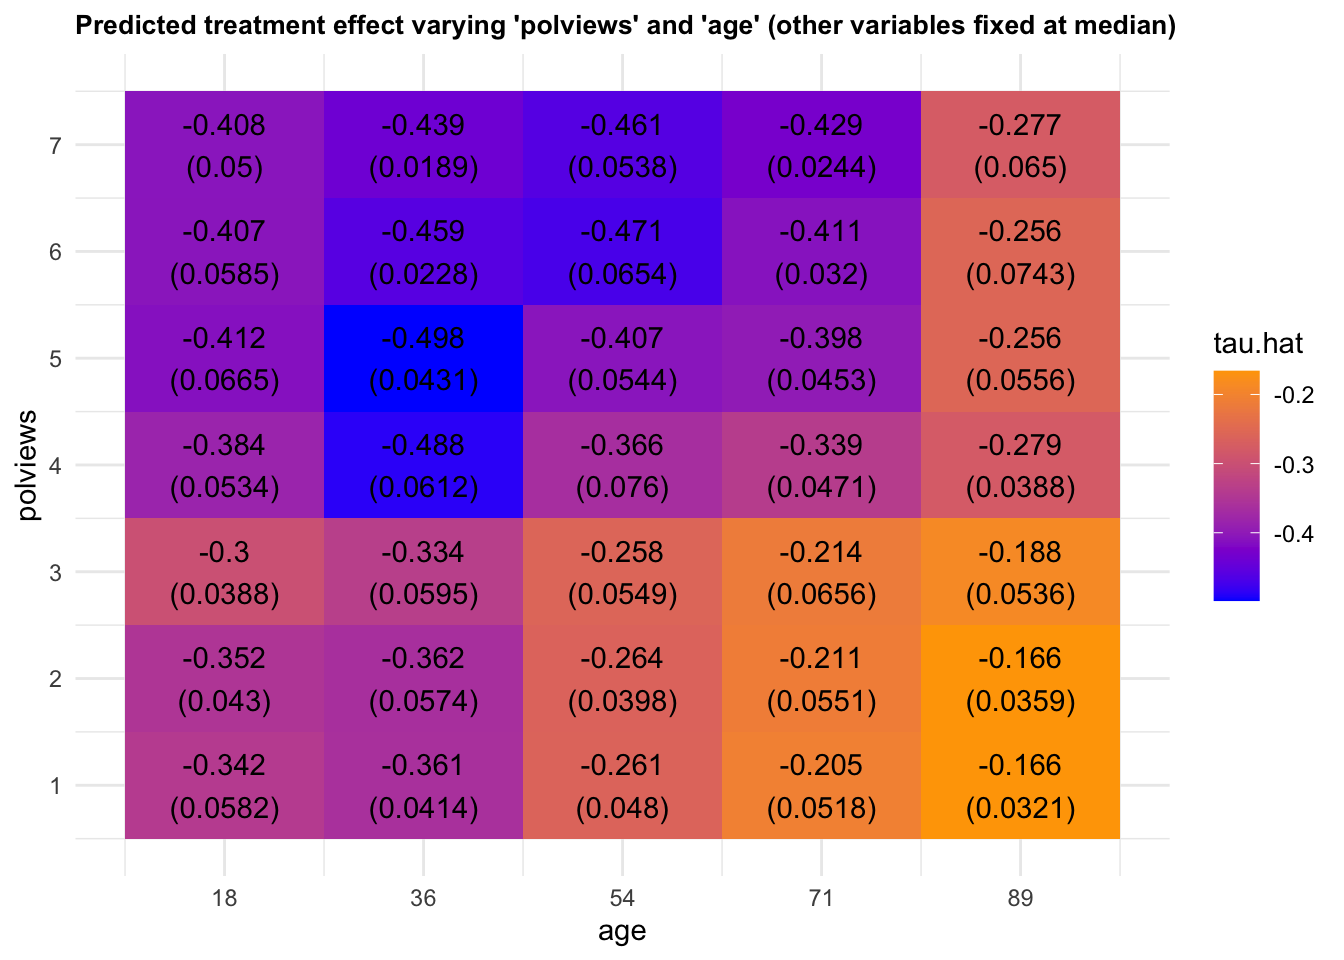 Predicted treatment effect varying two variables